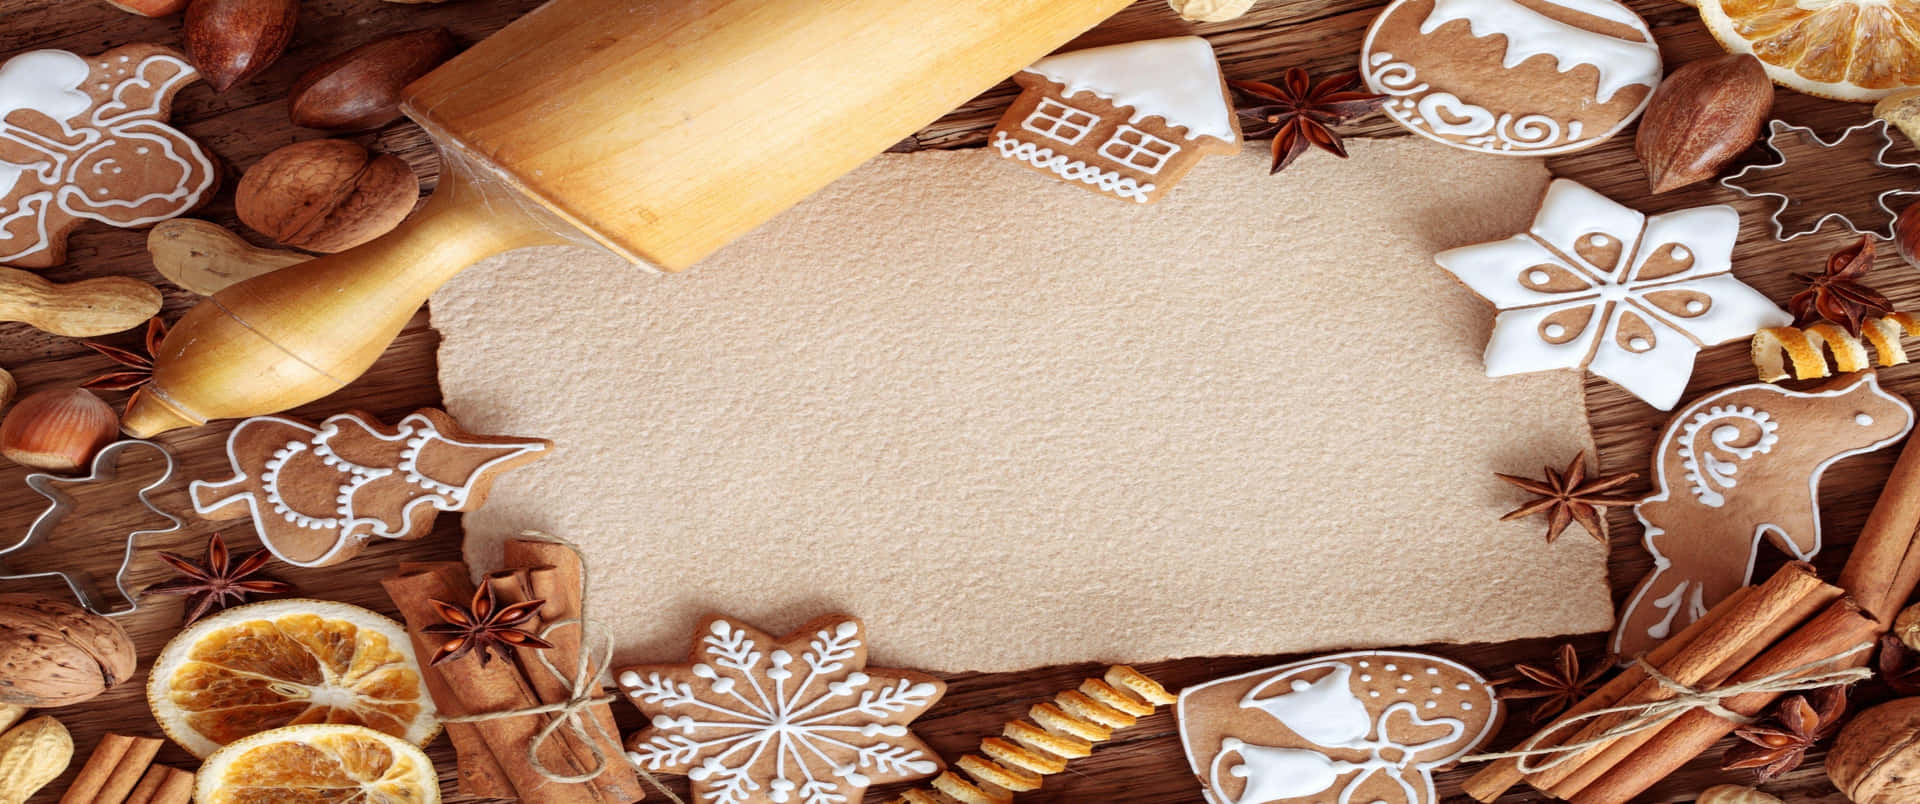 Cardboard And Rolling Pin 3440x1440p Cookies Background